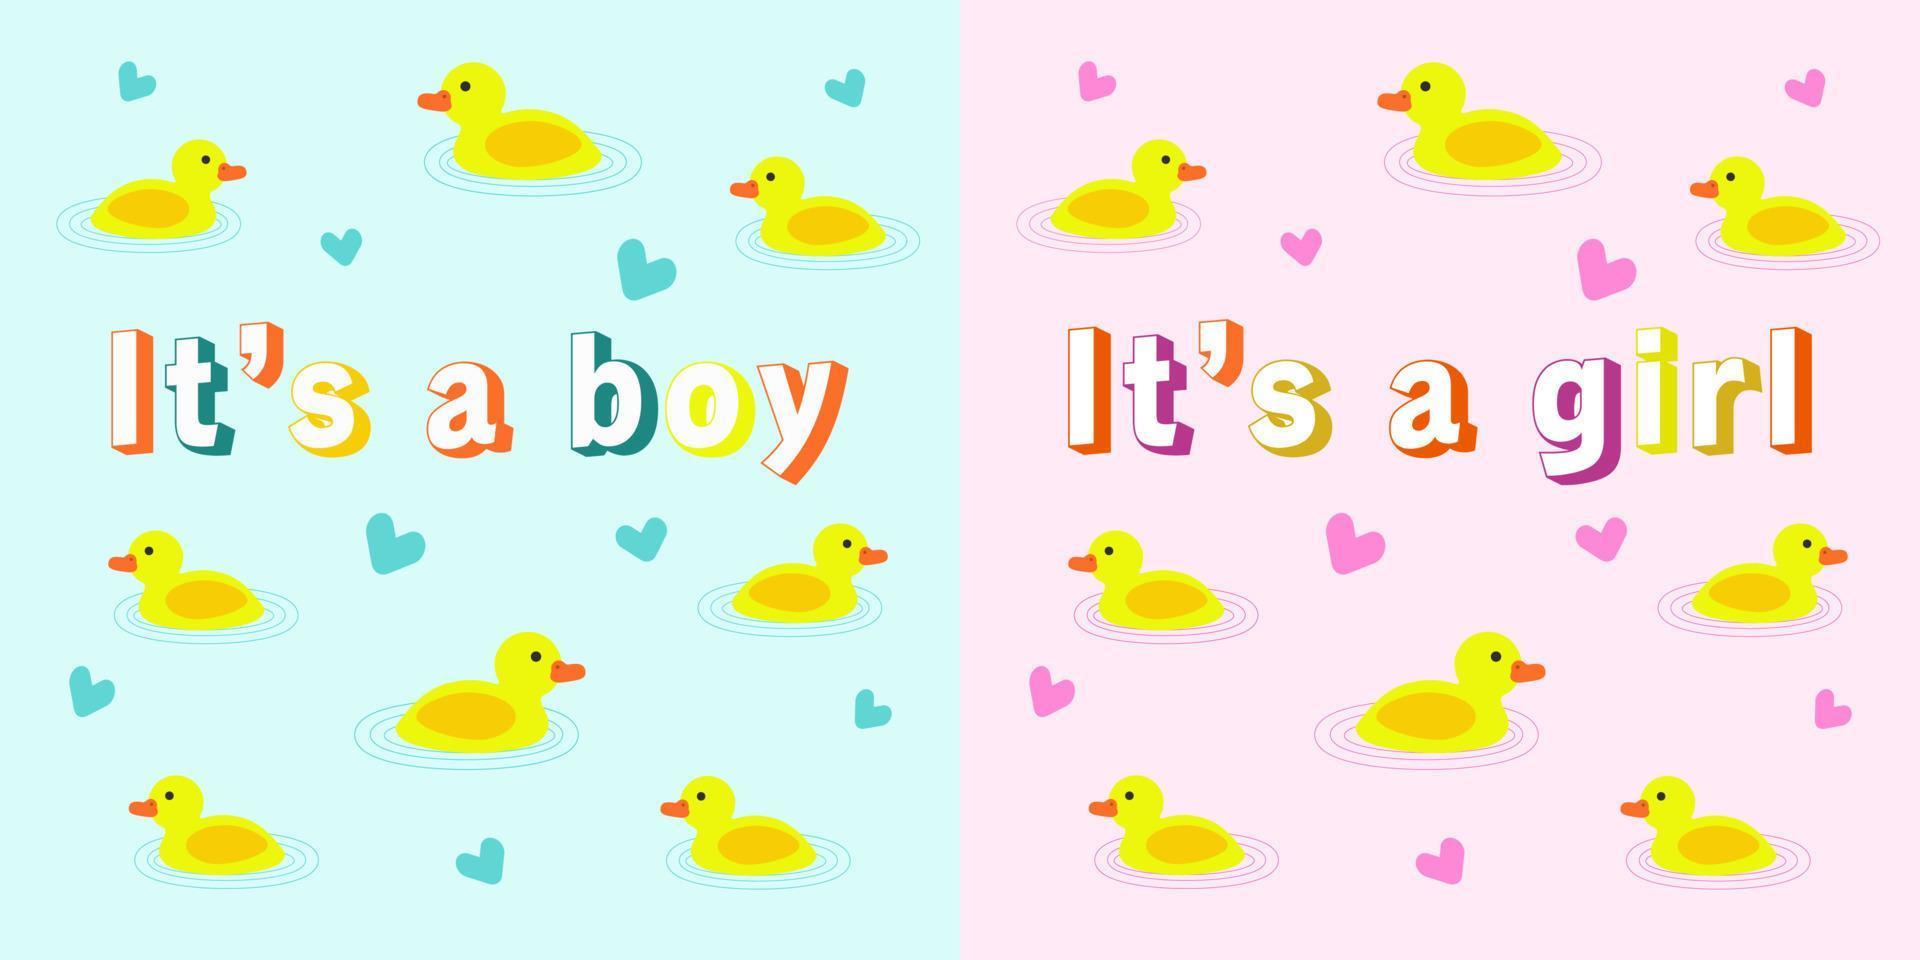 It's a boy, it's a girl. Greeting for a newborn baby. Ducklings and little hearts. Graphic design. vector